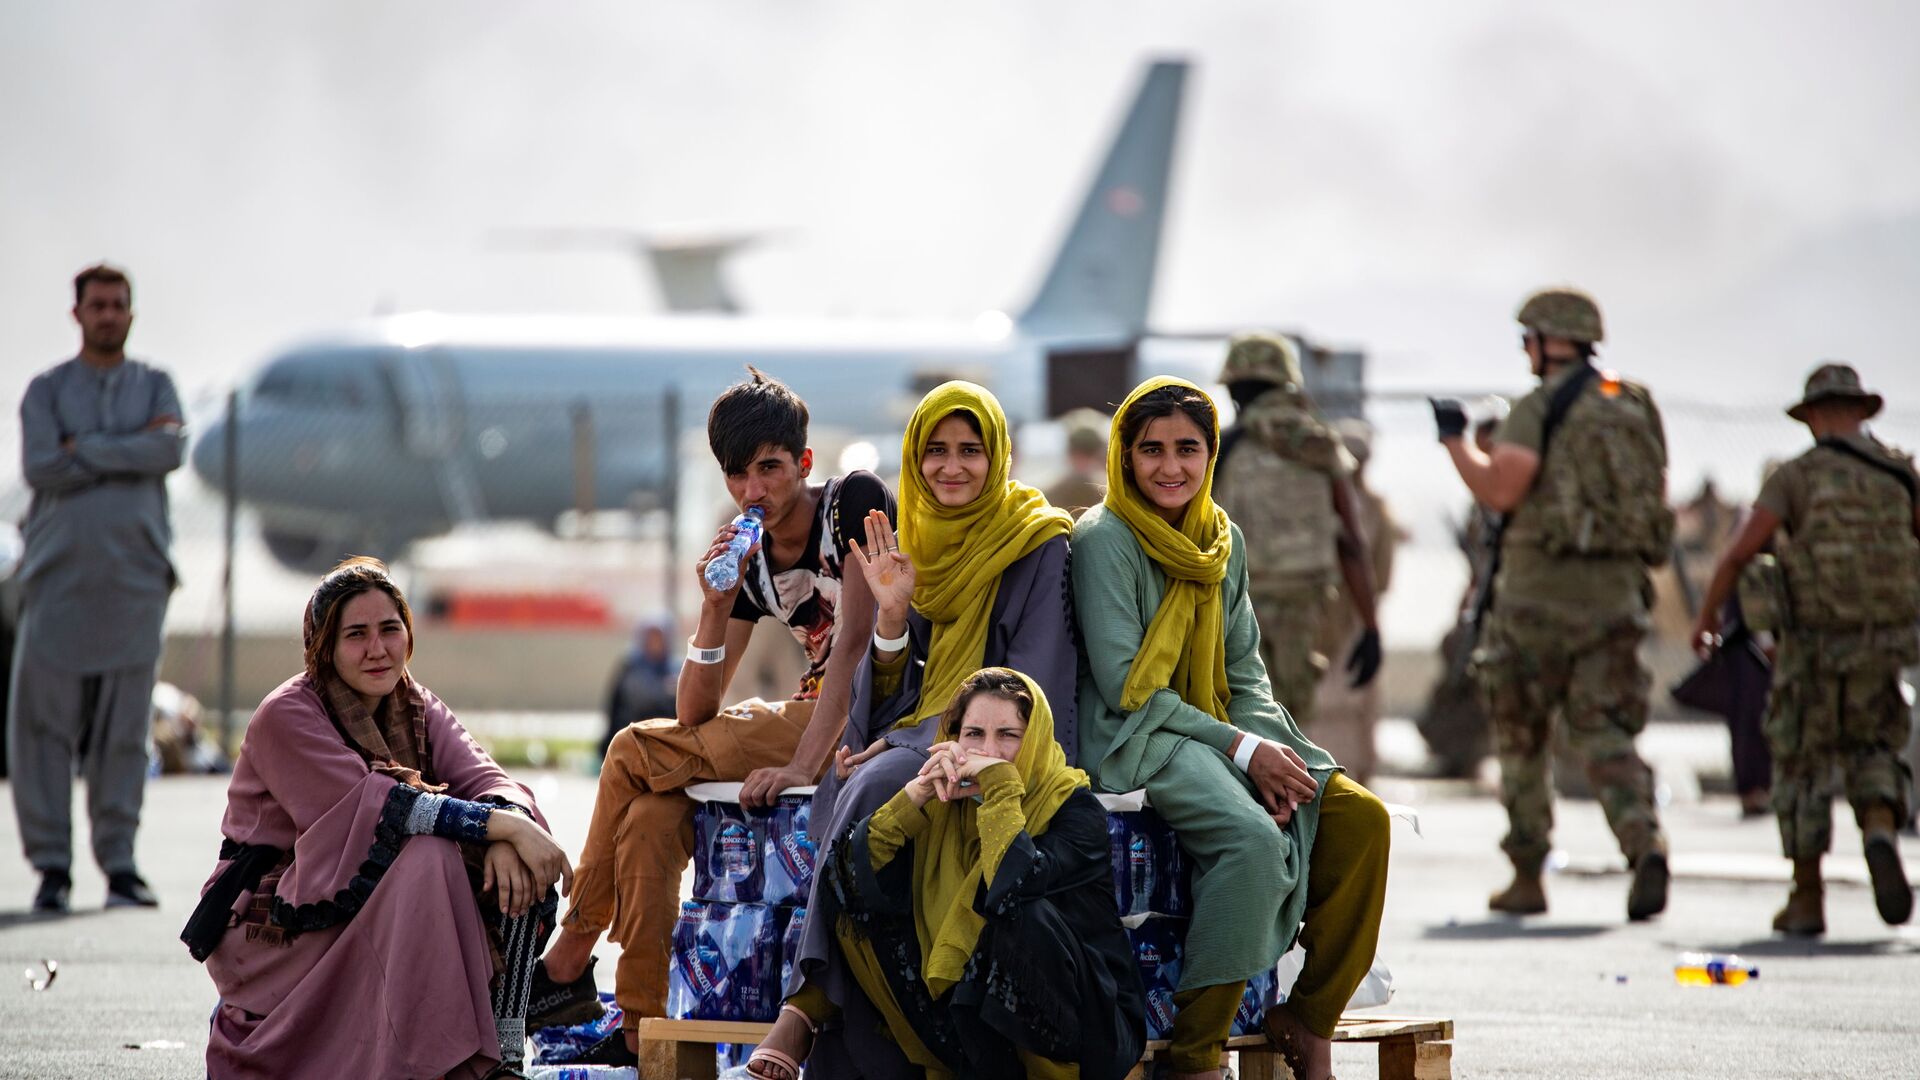 Evacuee children wait for the next flight after being manifested at Hamid Karzai International Airport, in Kabul, Afghanistan, August 19, 2021 - Sputnik International, 1920, 24.08.2021